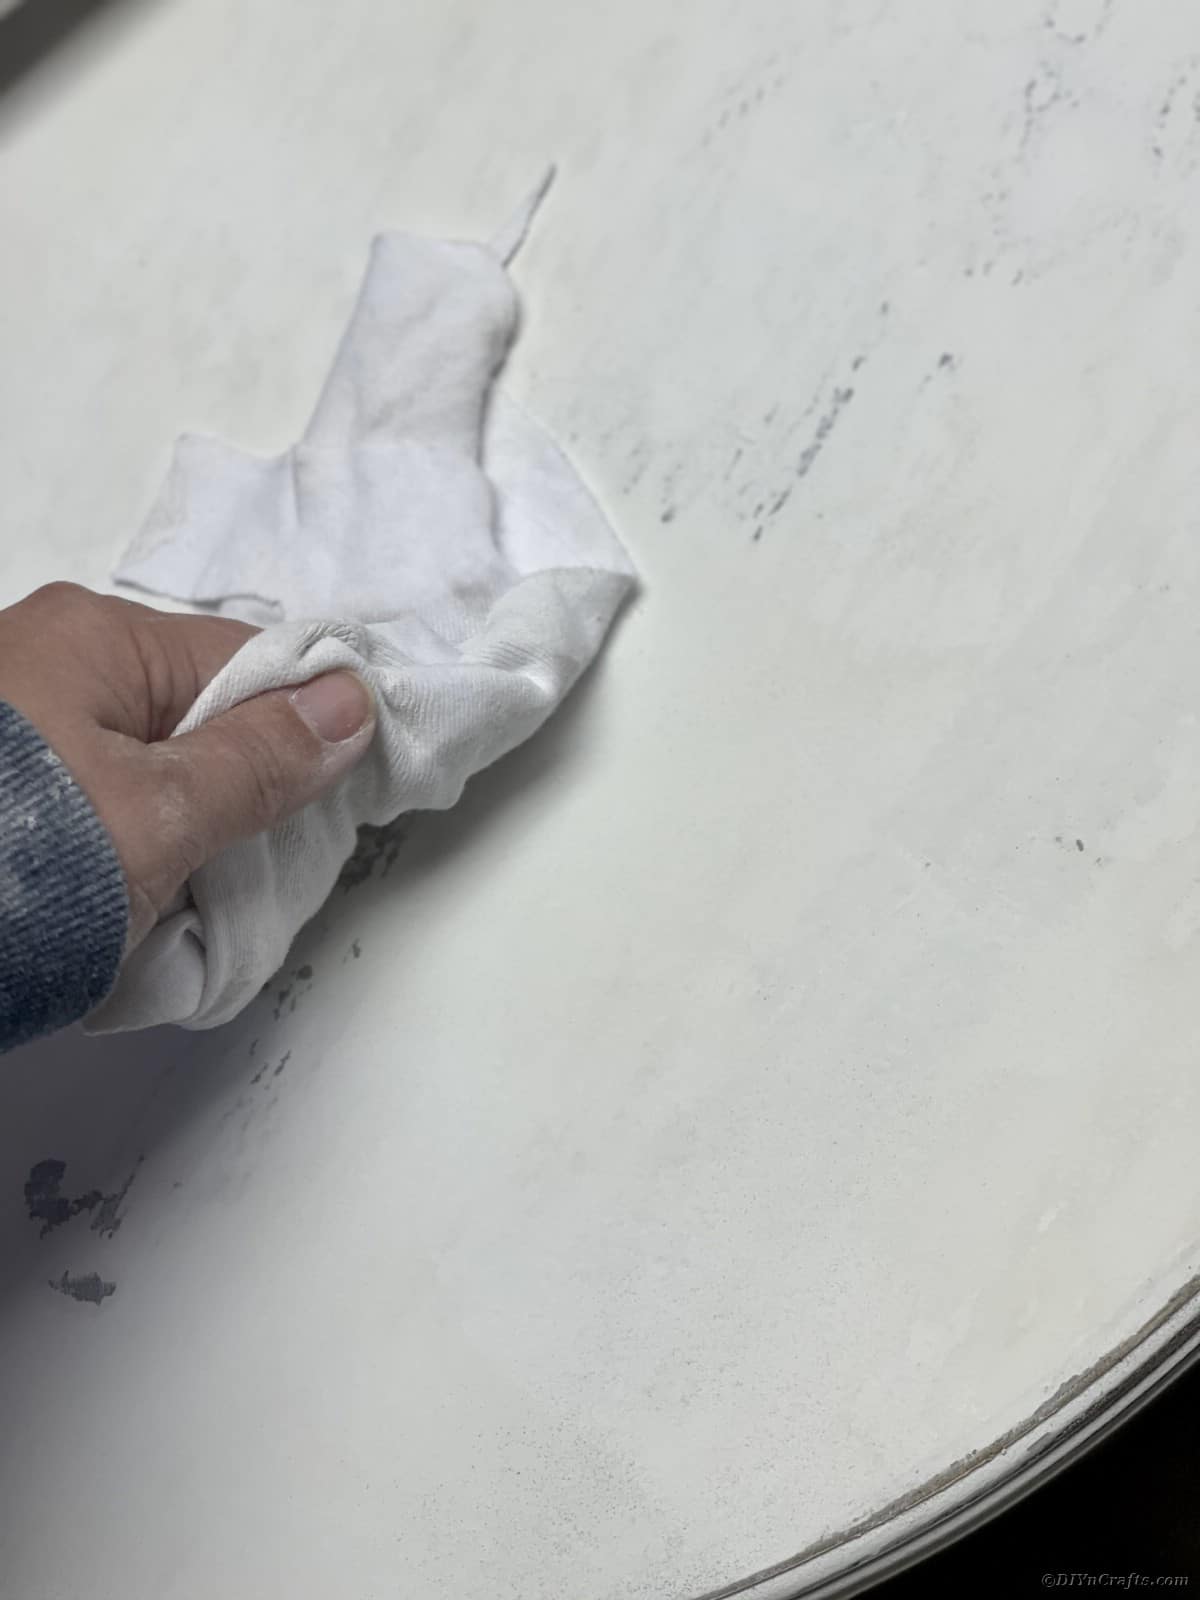 White cloth being wiped over top of white table